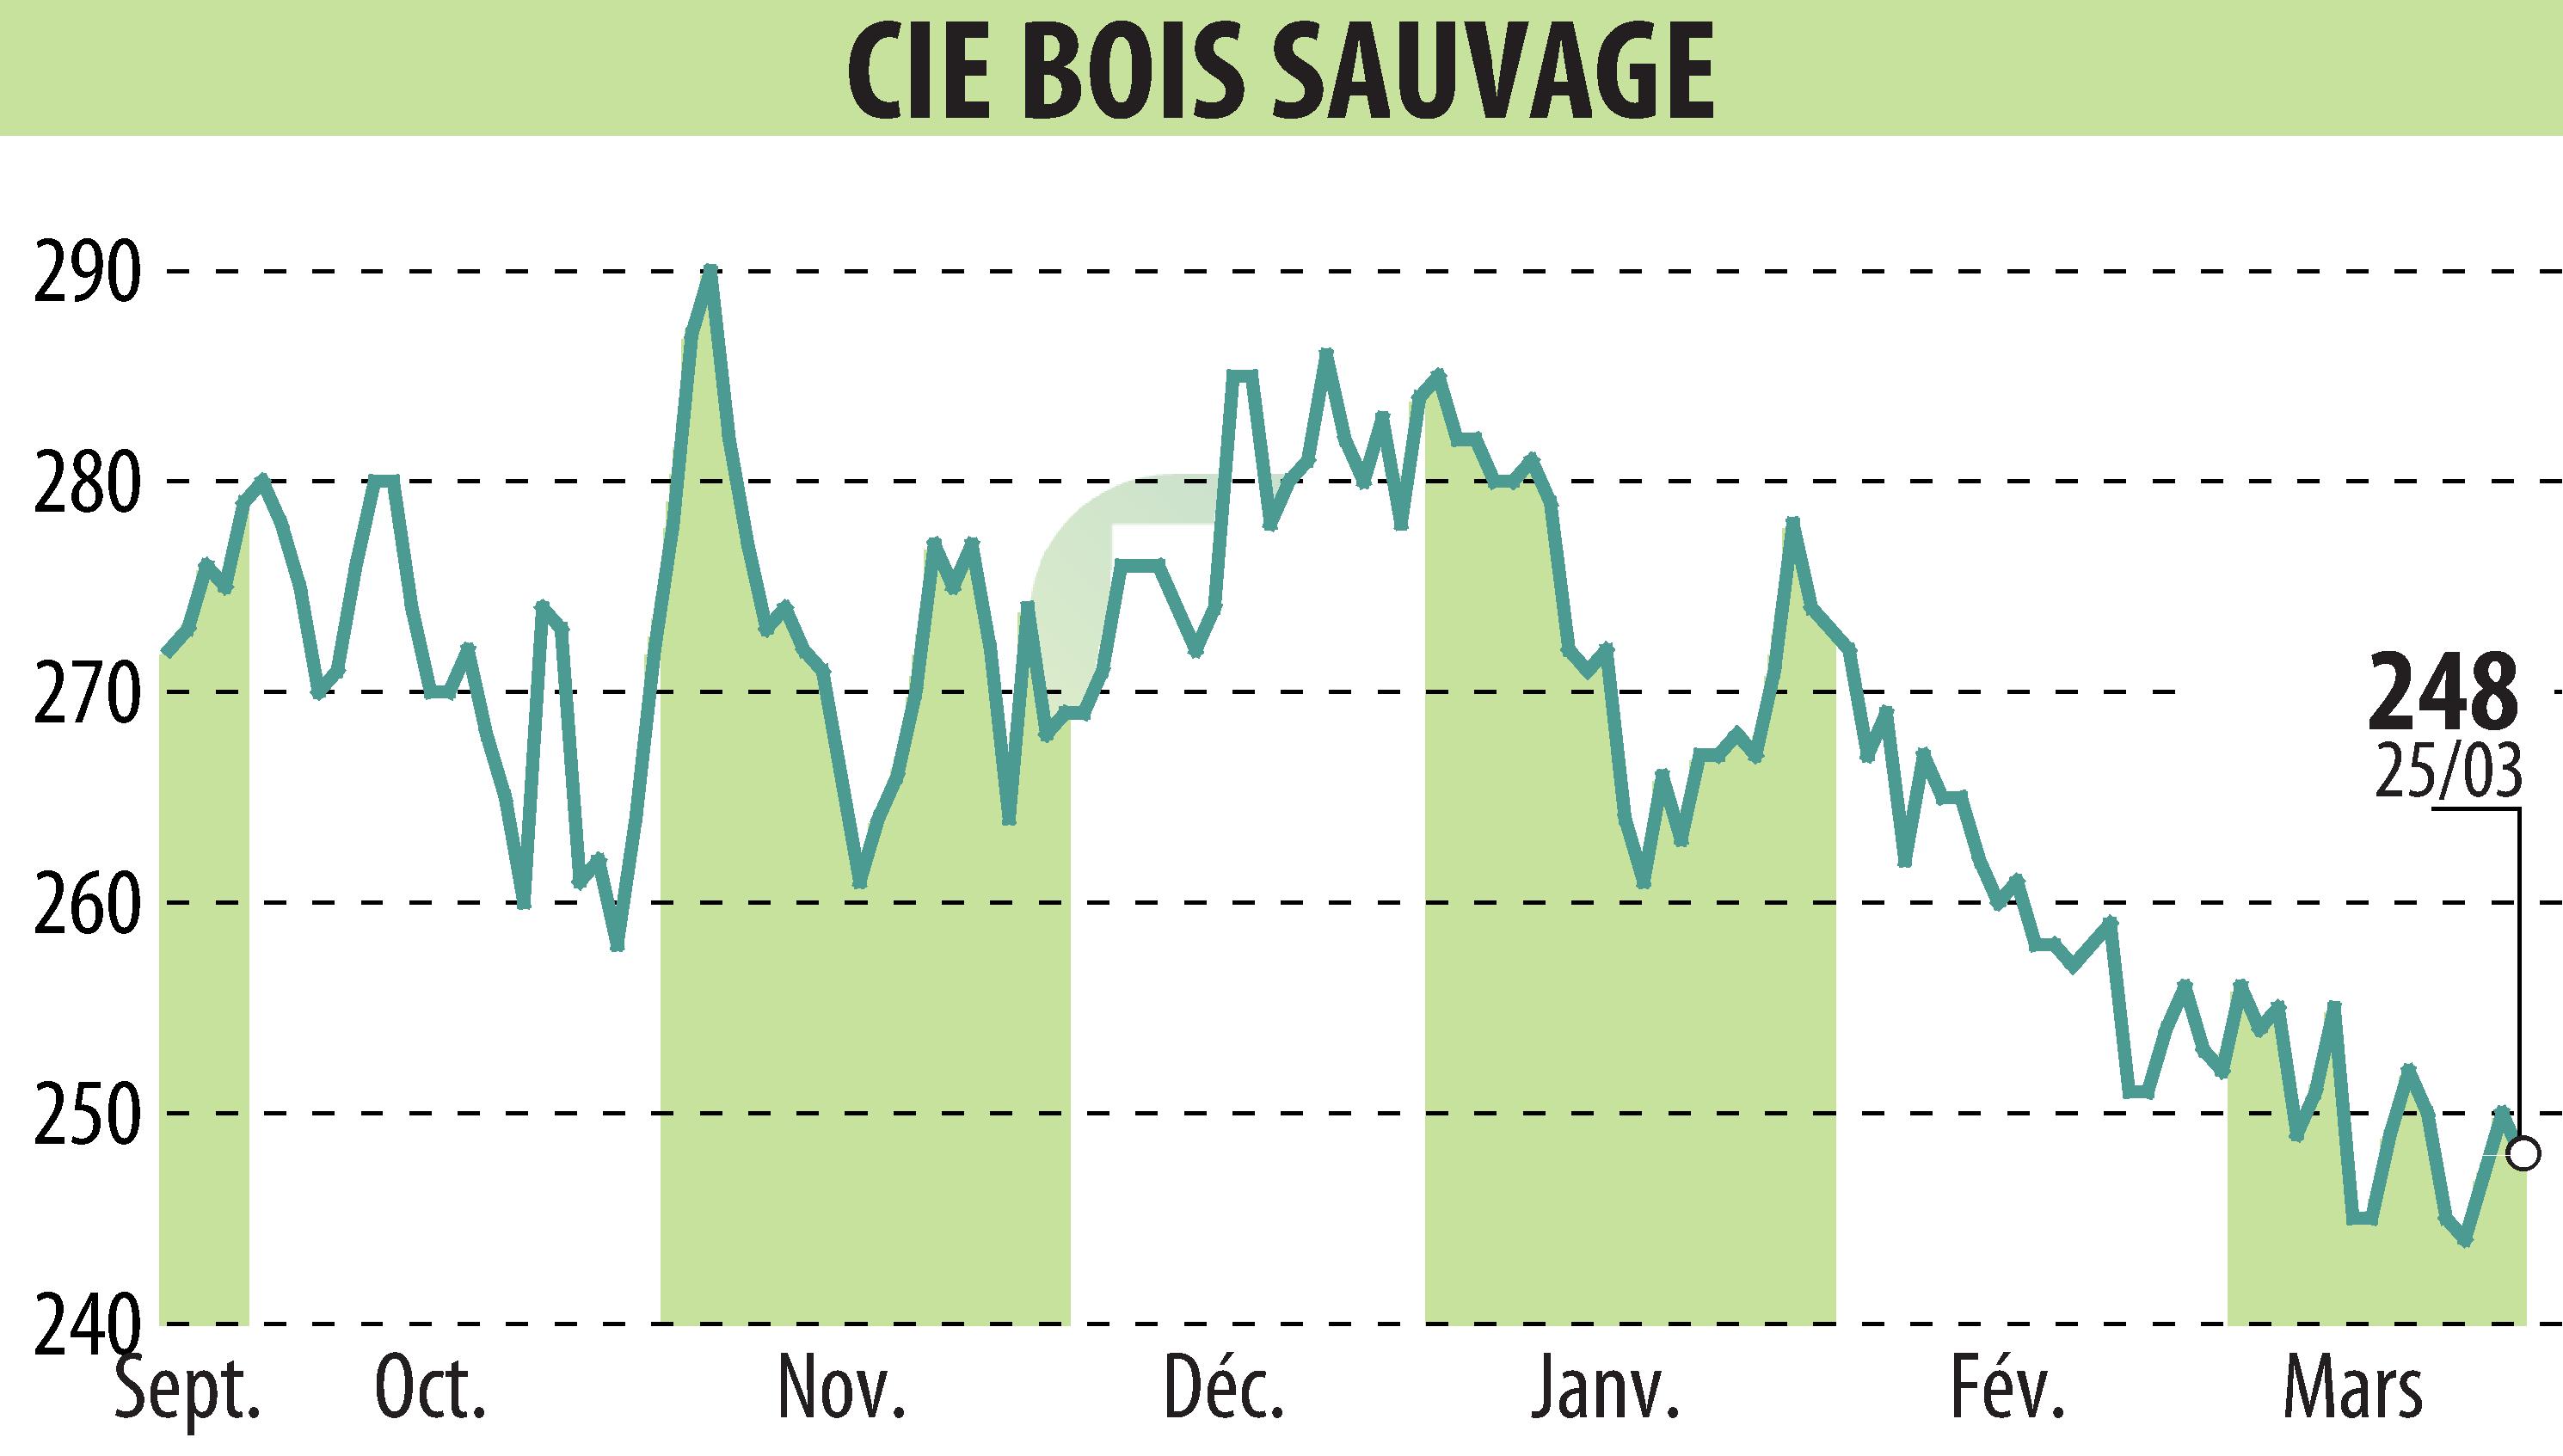 Stock price chart of COMPAGNIE BOIS SAUVAGE (EBR:COMB) showing fluctuations.